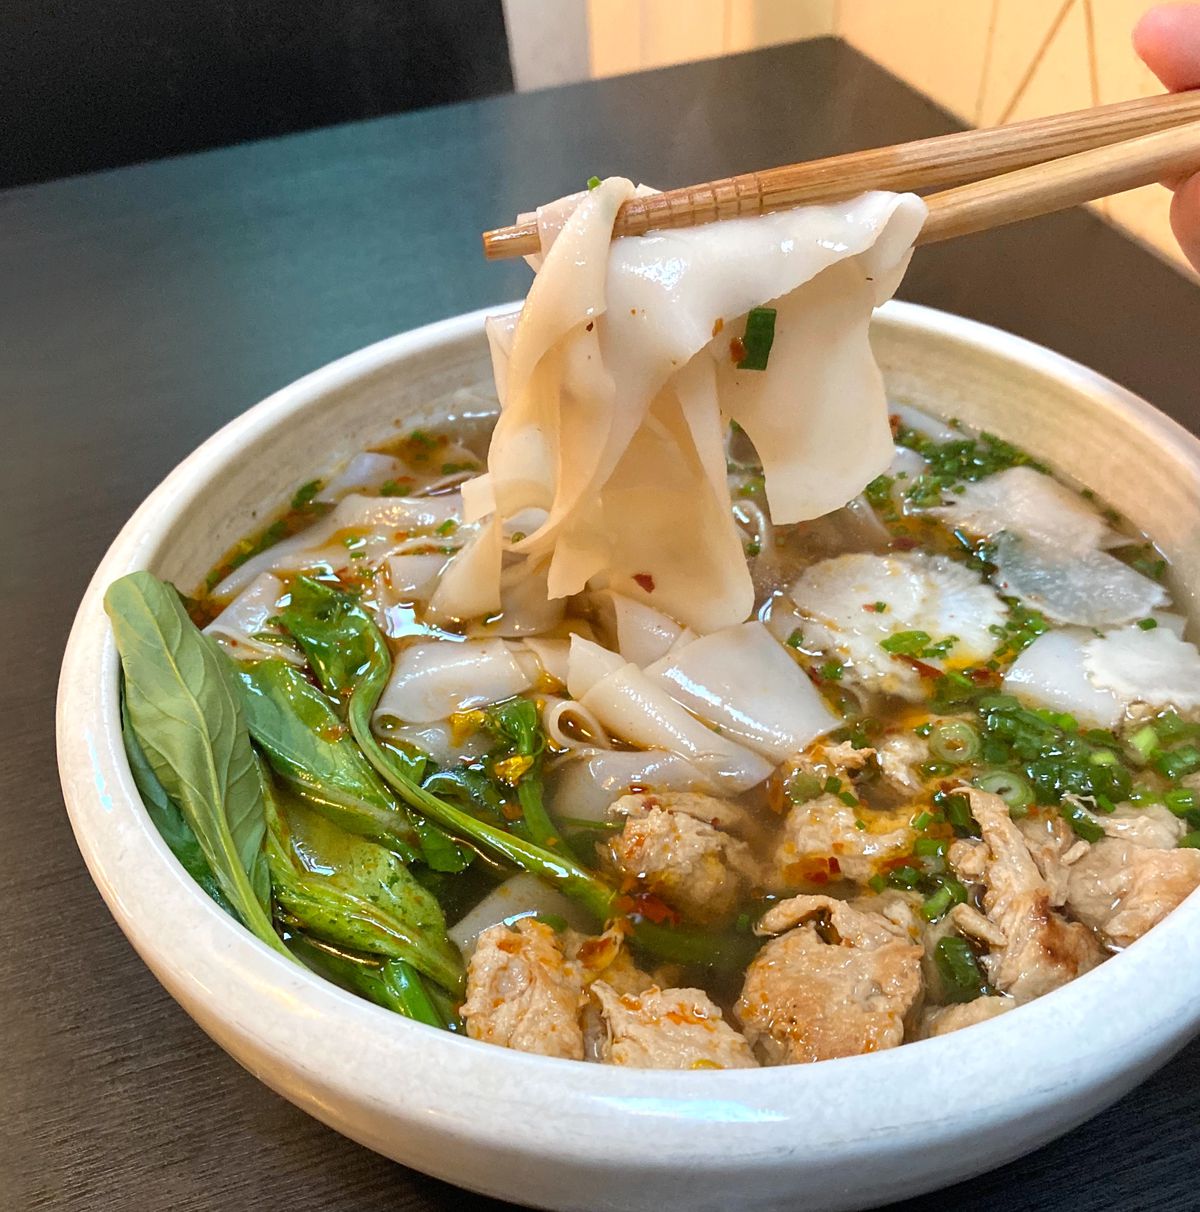 A picture of chopsticks holding up wide rice noodles in a broth with greens and fake chicken